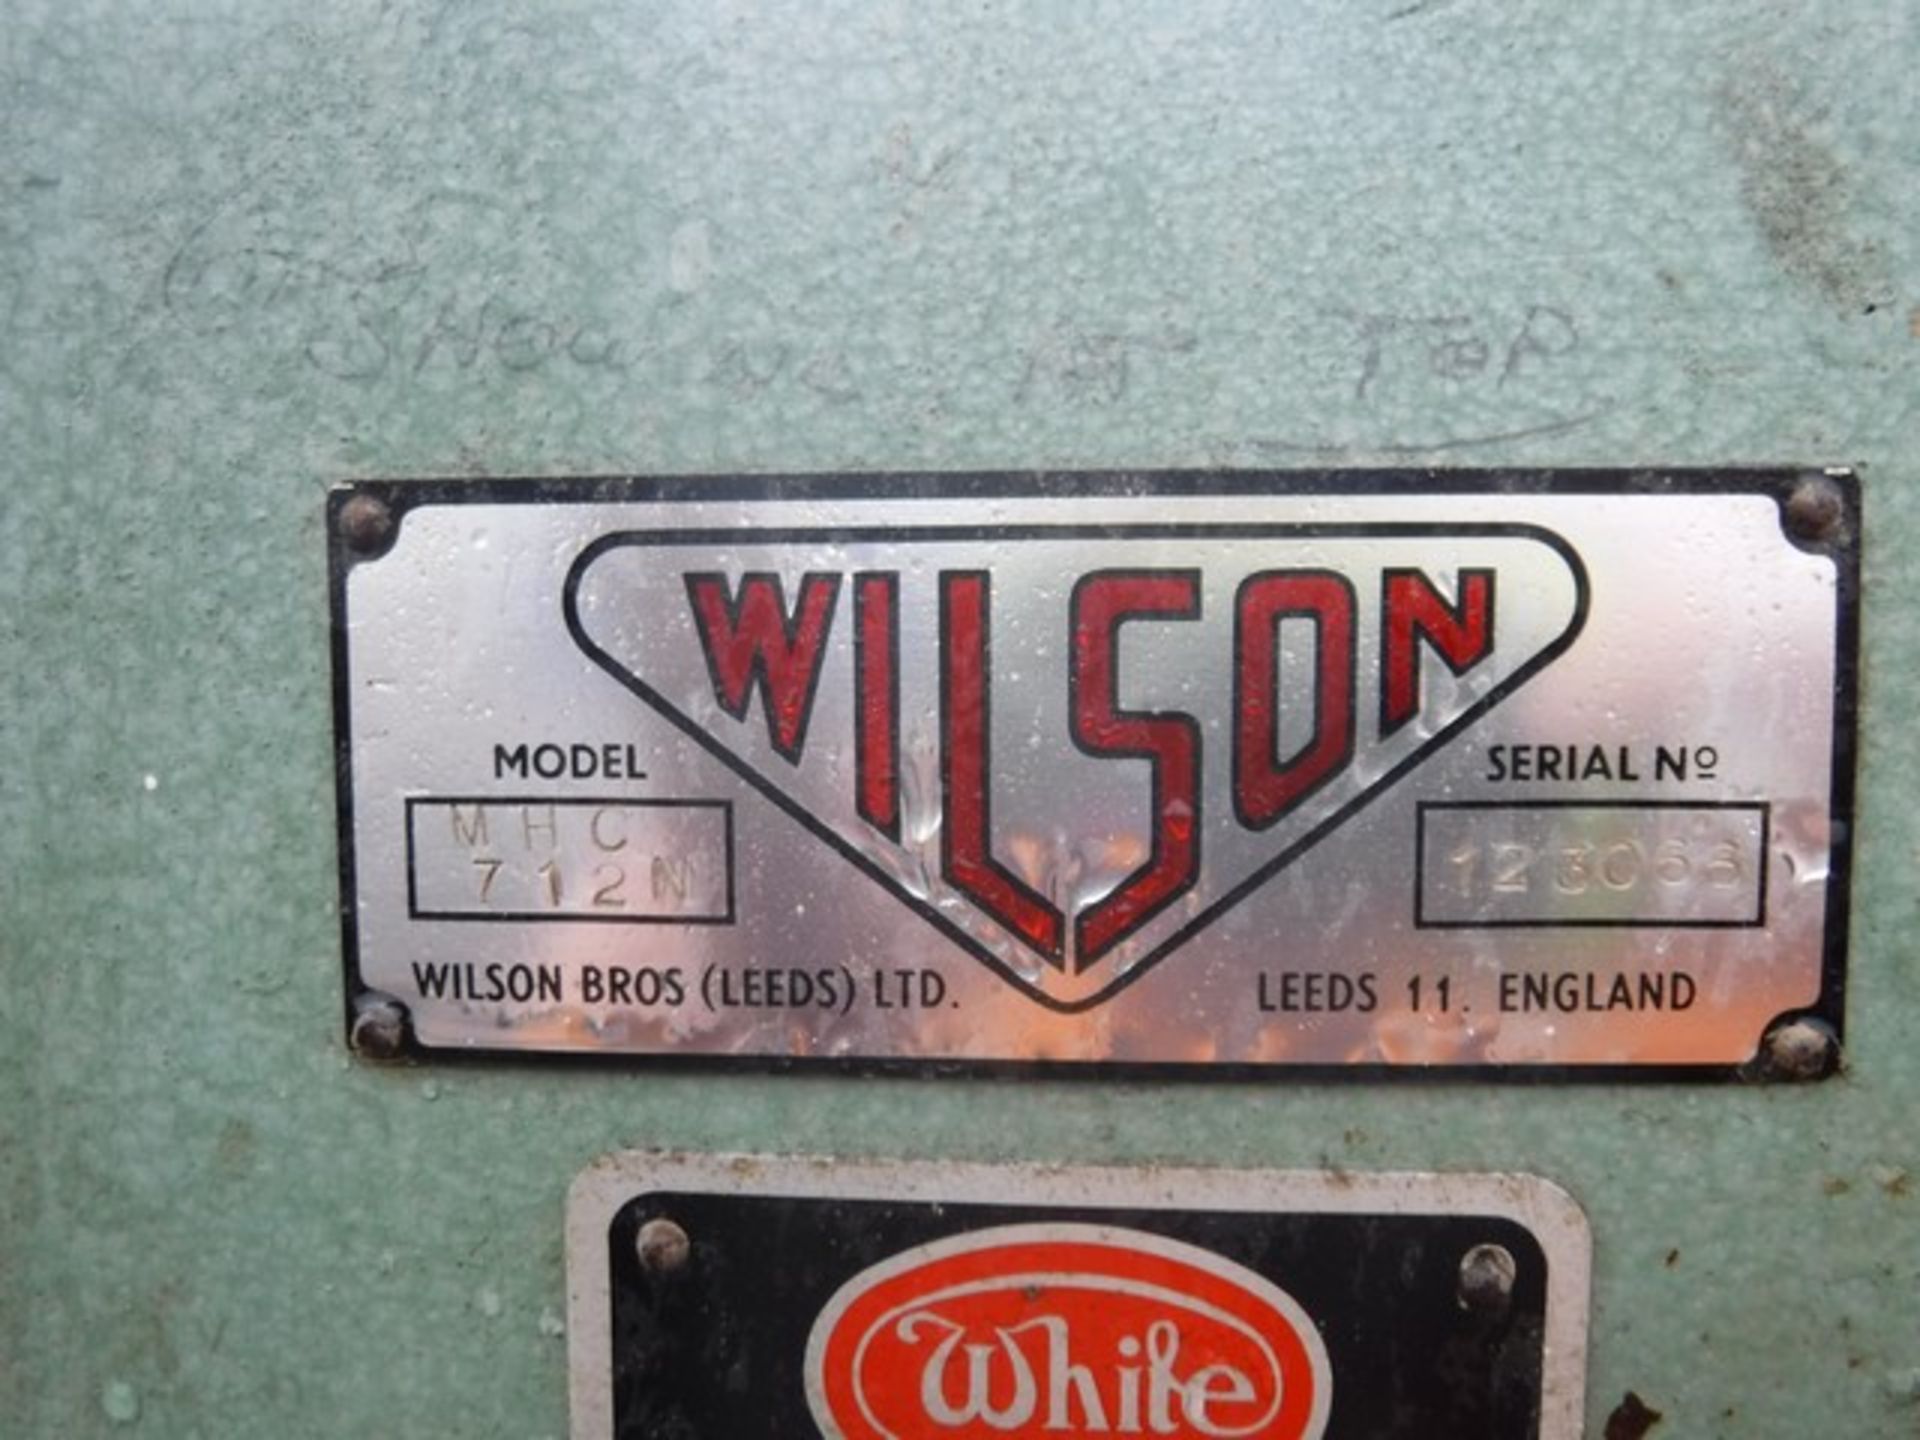 WILSON MORTICER/CHISEL & BOX OF CHISELS MODEL - MHC712N, S/N 123066 / M469105, 3 PH, 440VOLTS, 2.75A - Image 6 of 8